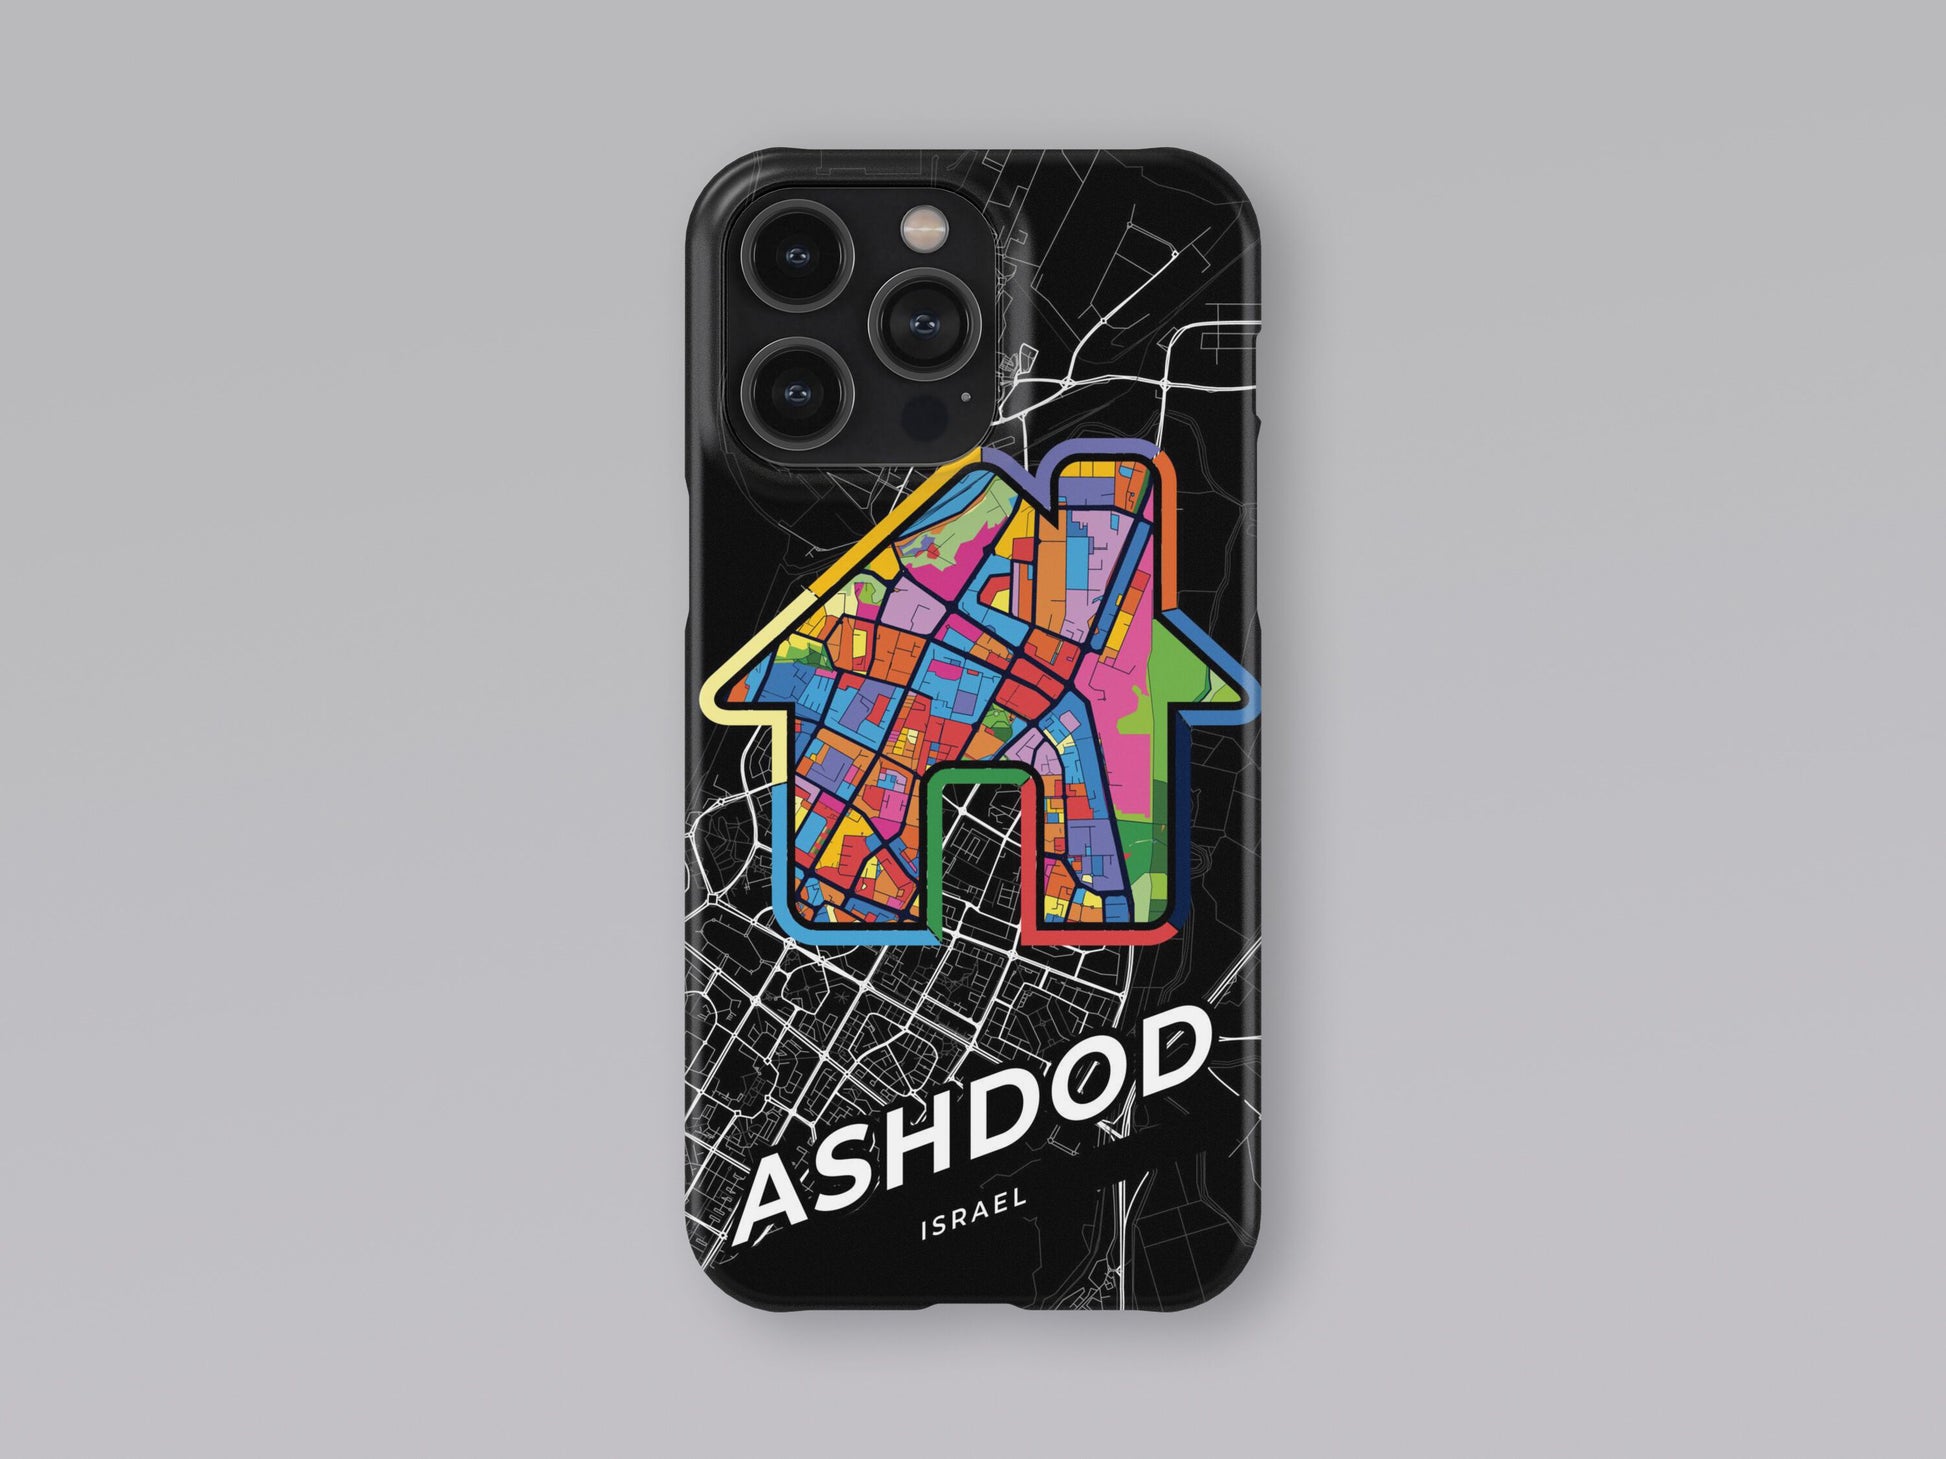 Ashdod Israel slim phone case with colorful icon. Birthday, wedding or housewarming gift. Couple match cases. 3